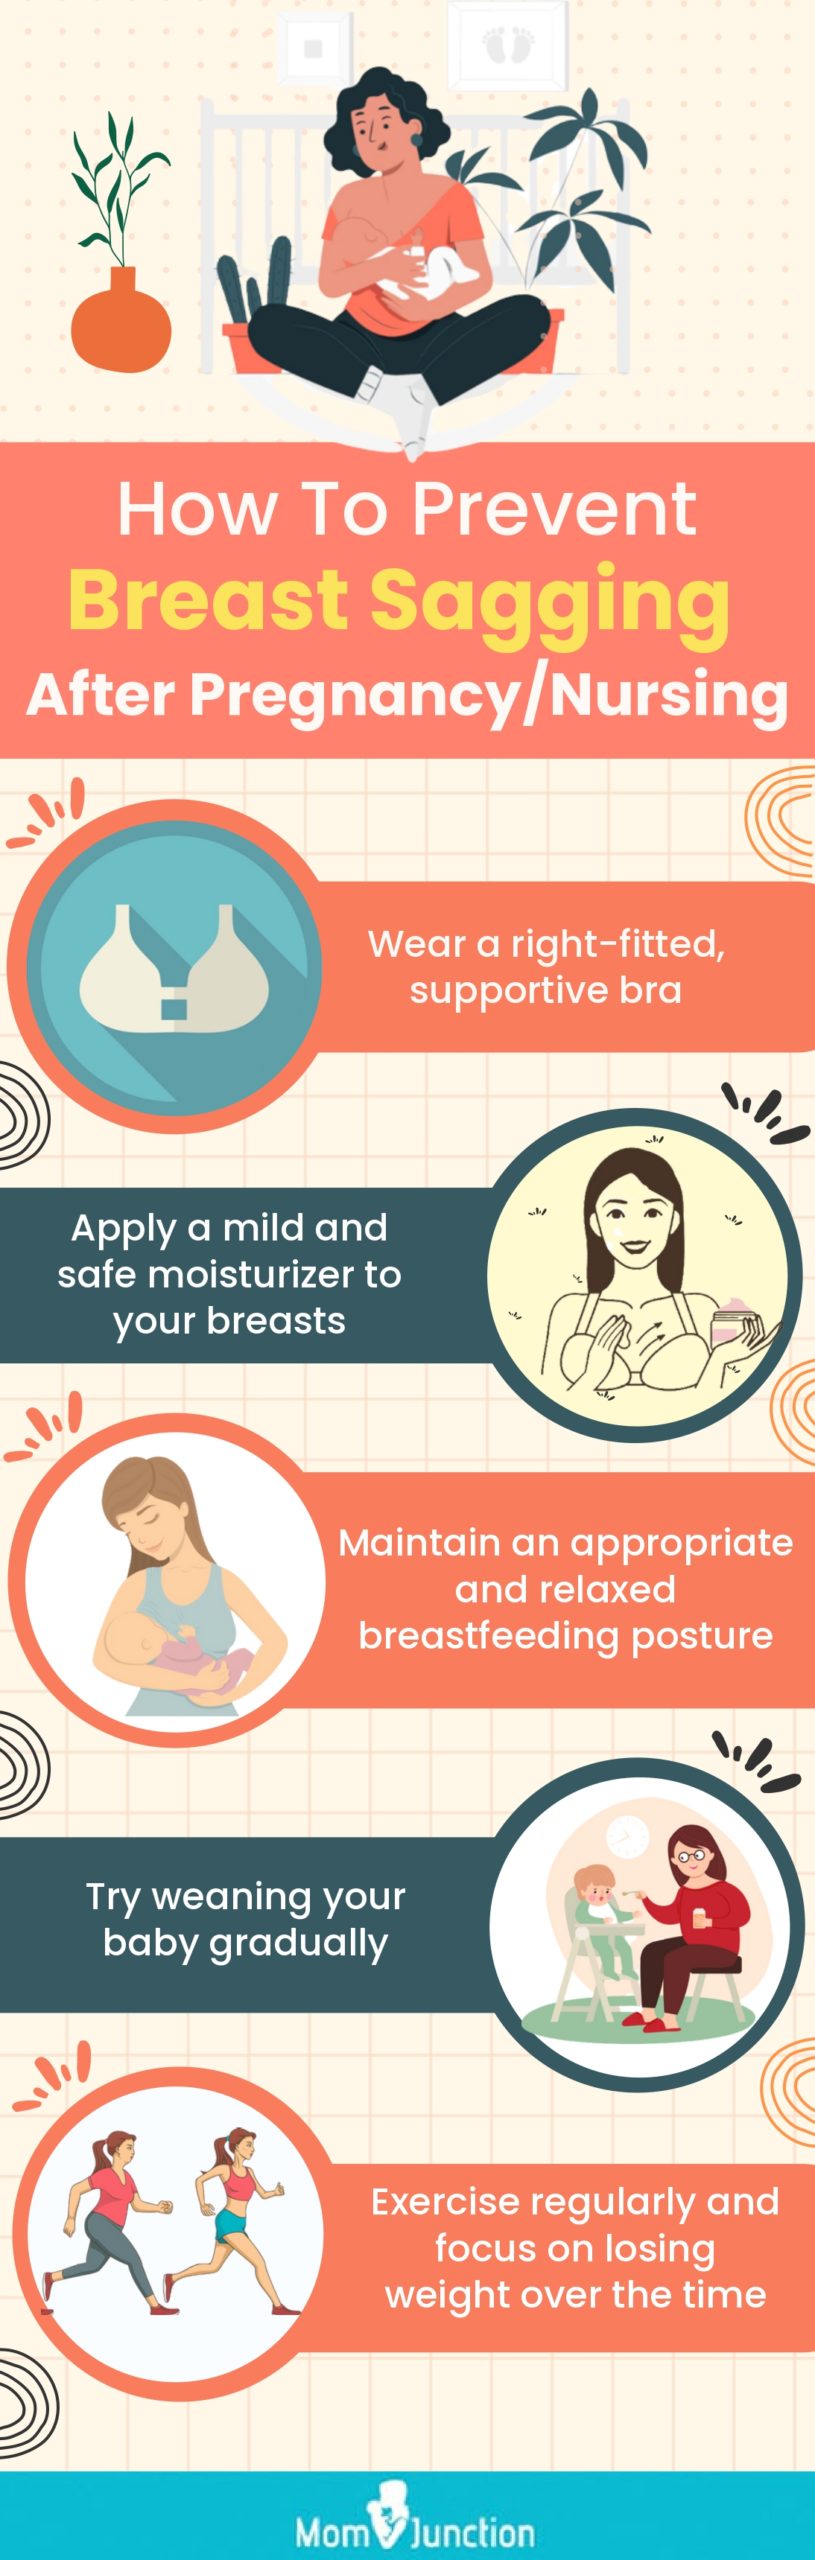 10 Ways To Prevent Sagging Breasts After Pregnancy & Beyond